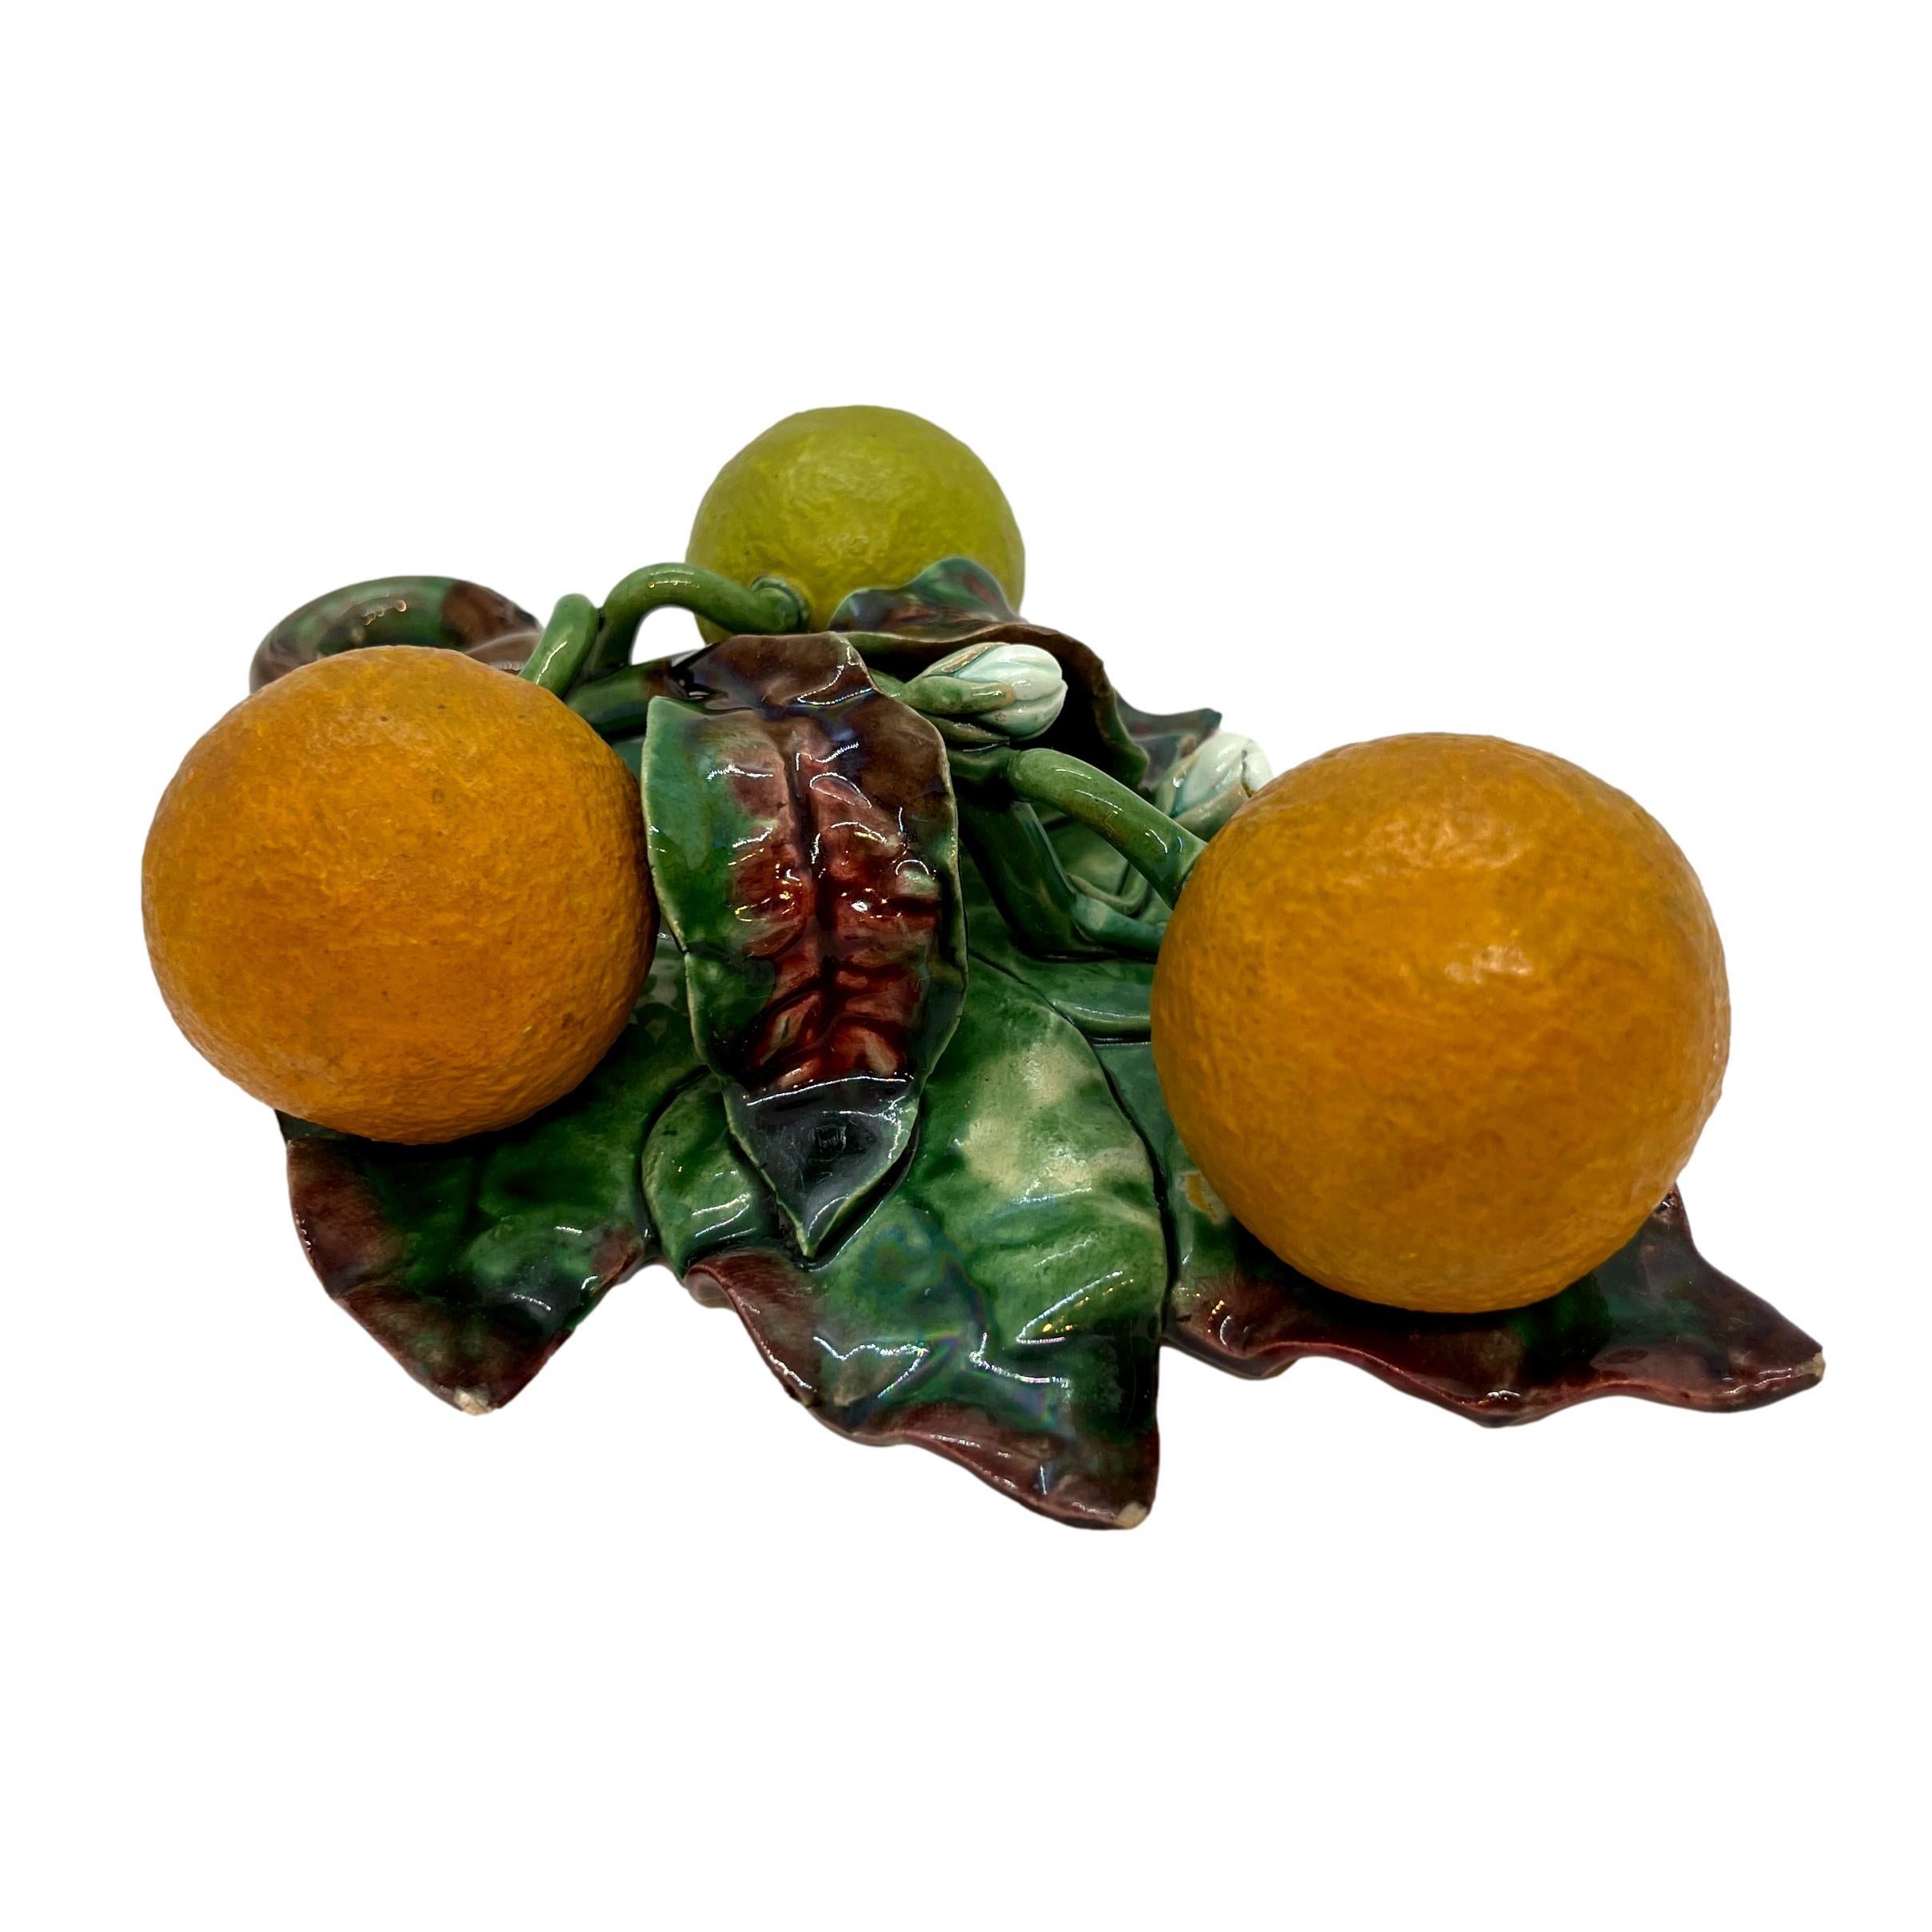 Molded French Majolica Trompe L'oeil Wall Plaque with Oranges, Perret-Gentil, Menton For Sale